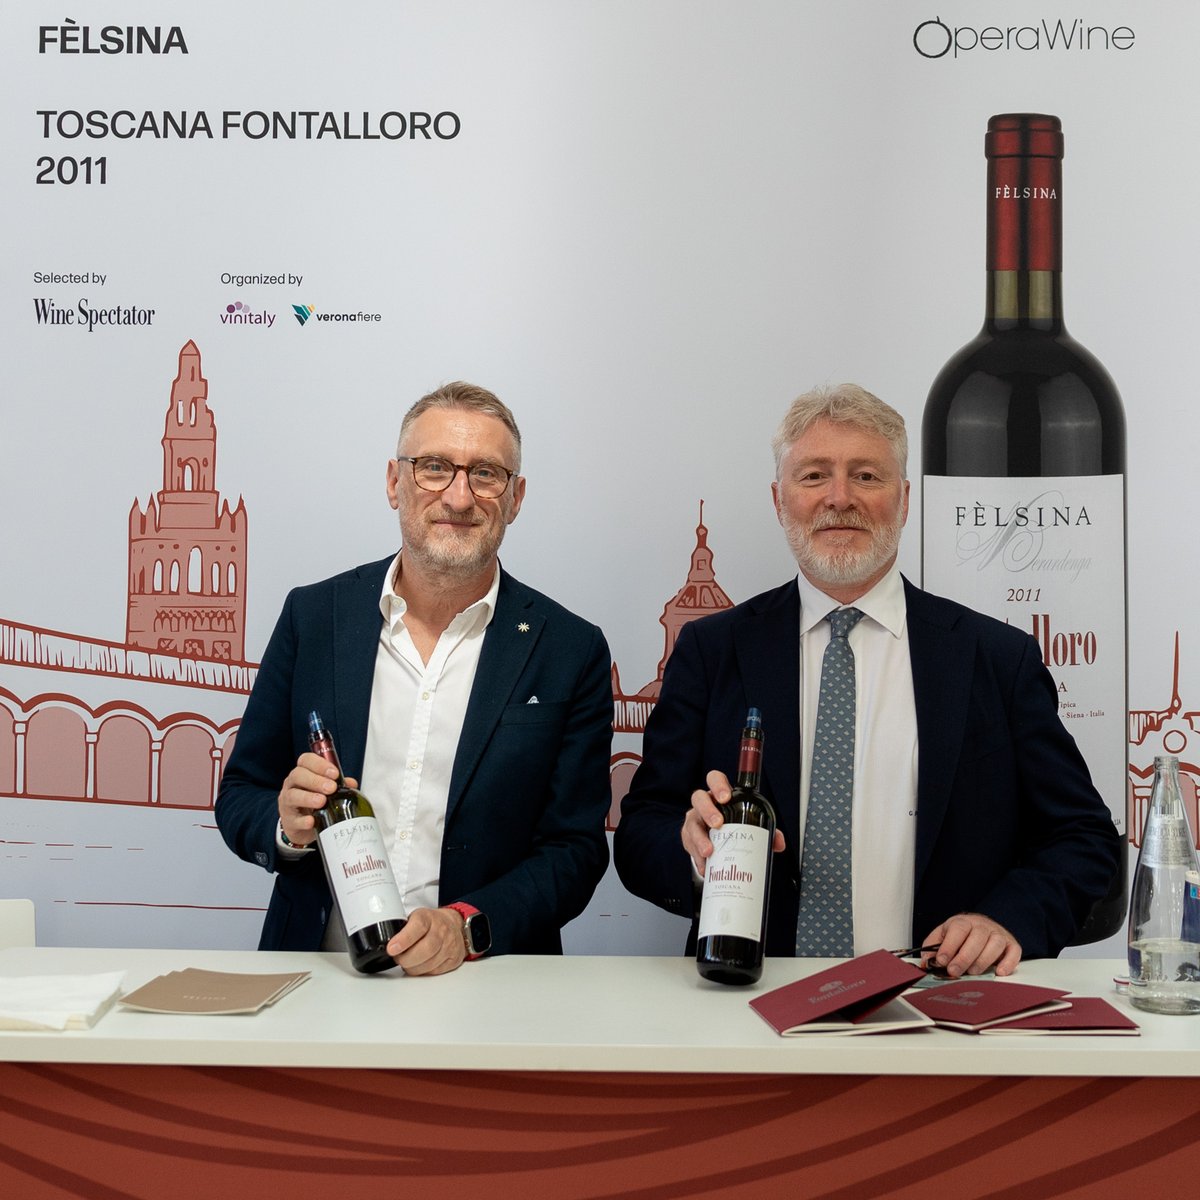 Here is the portrait of @felsinawines, one of the great Italian producers selected by Wine Spectator for #OperaWine2024. During this year's Grand Tasting, they shared with guests their Toscana Fontalloro 2011. Congratulations again! #OperaWine #Vinitaly2024 #finestitalianwines